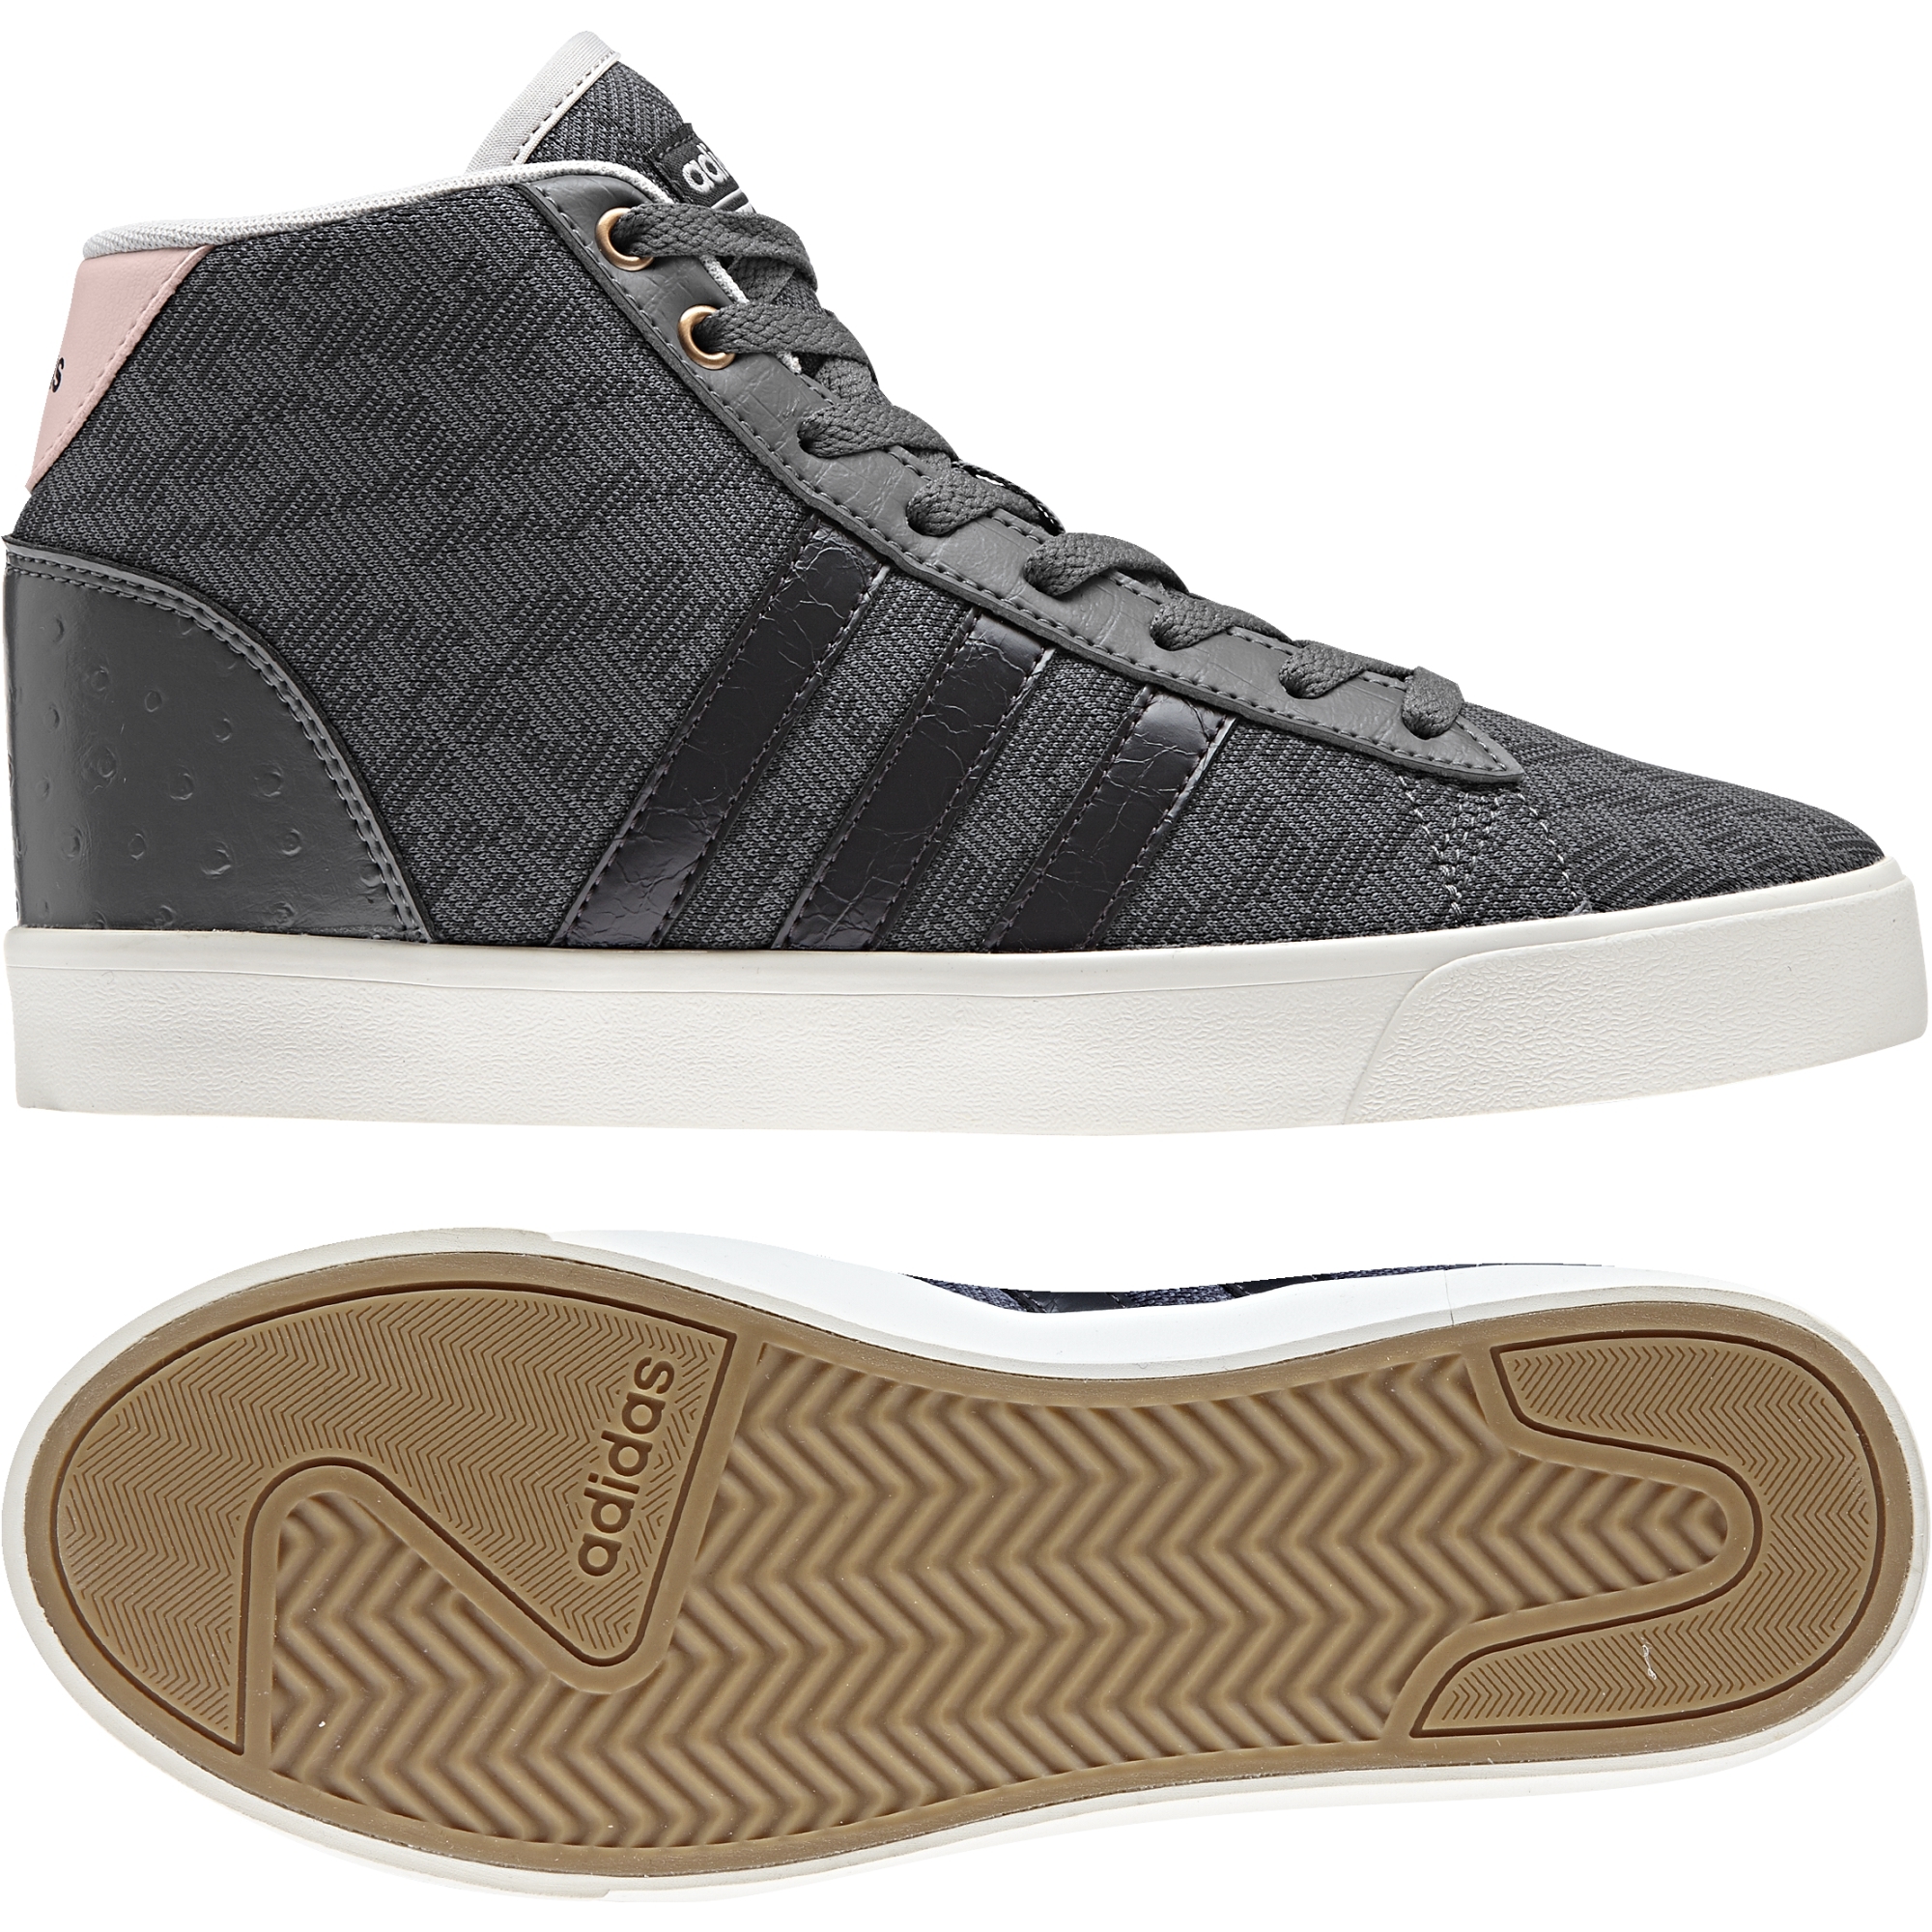 punto Sentido táctil Extra Womens ankle boots adidas CF DAILY QT MID W grey | AD Sport.store